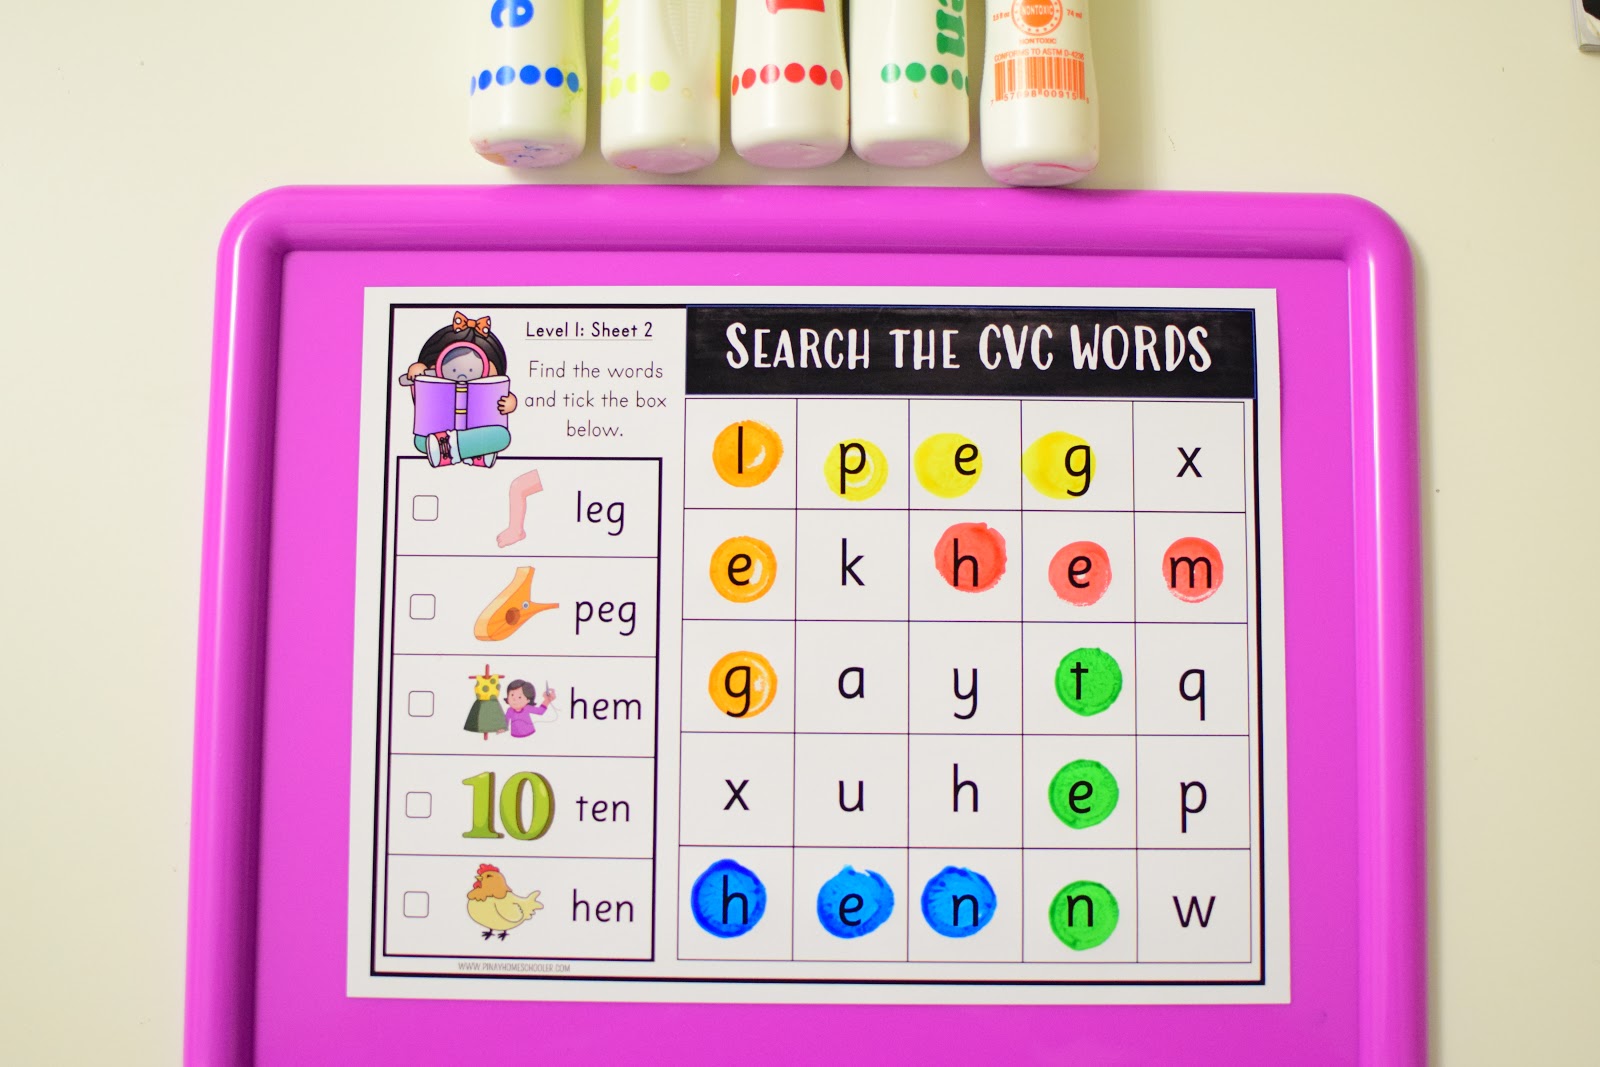 cvc-word-search-for-literacy-plus-free-sampler-the-pinay-homeschooler